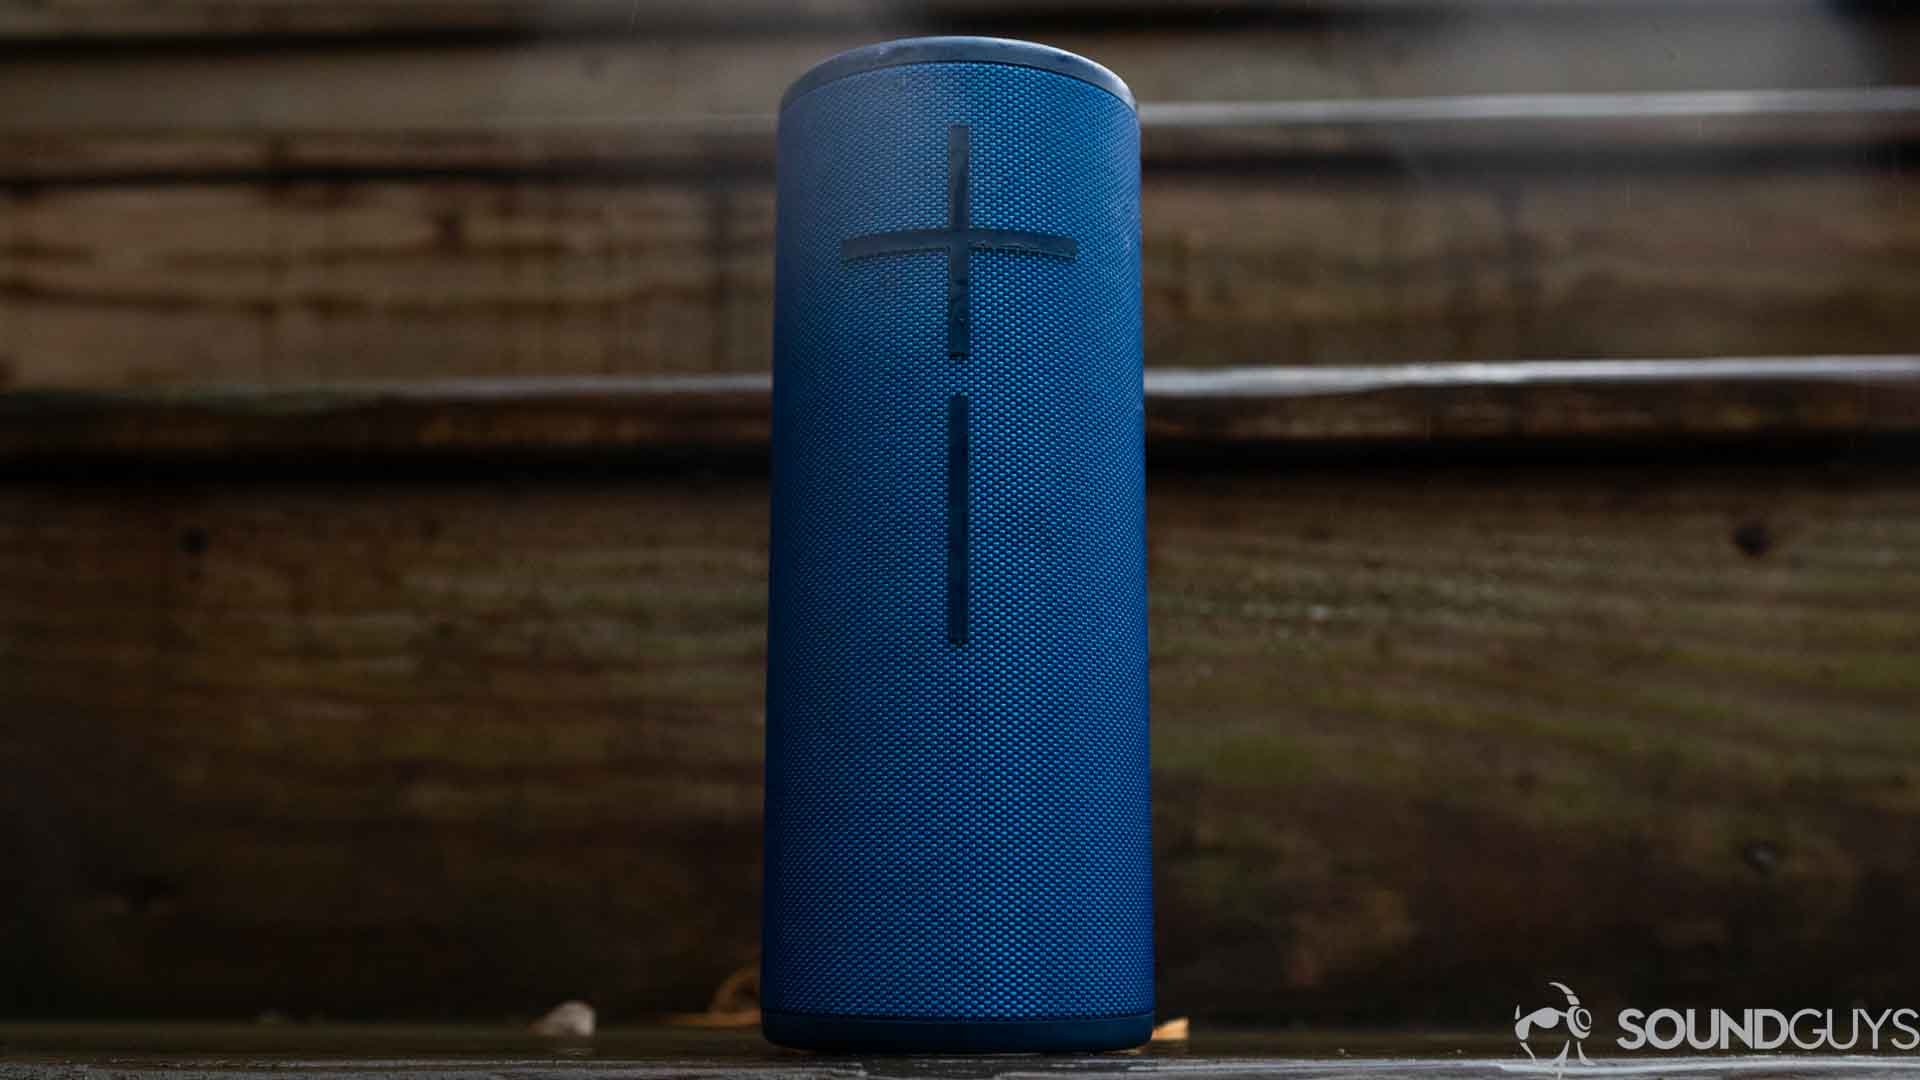 The UE Boom 3 in blue on steps.